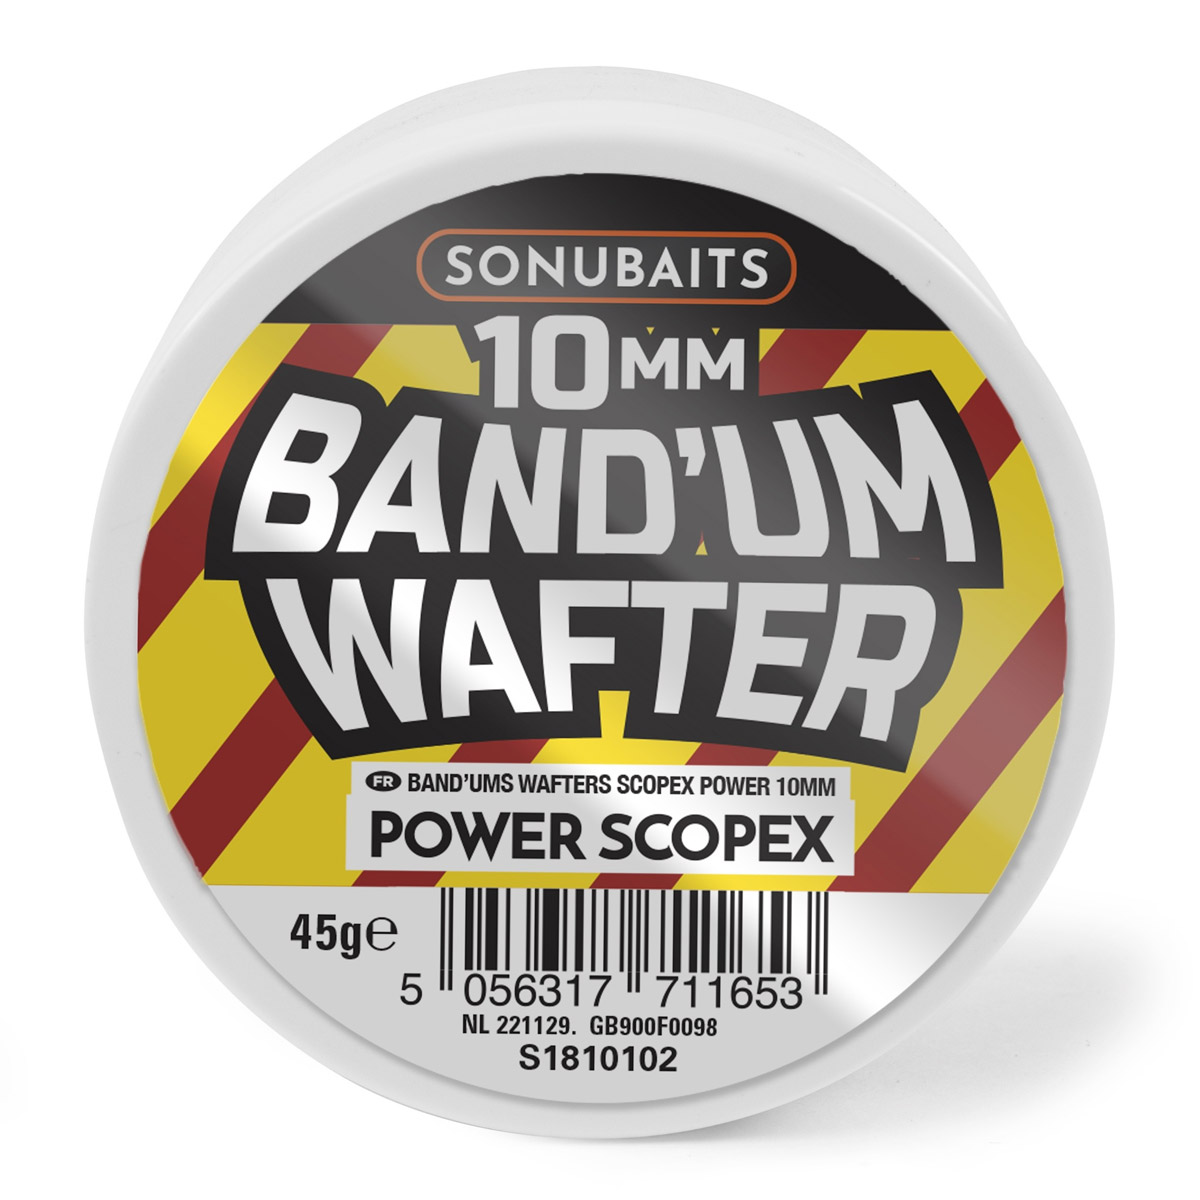 Sonubaits Band'um Wafter Power Scopex -  8 mm -  10 mm